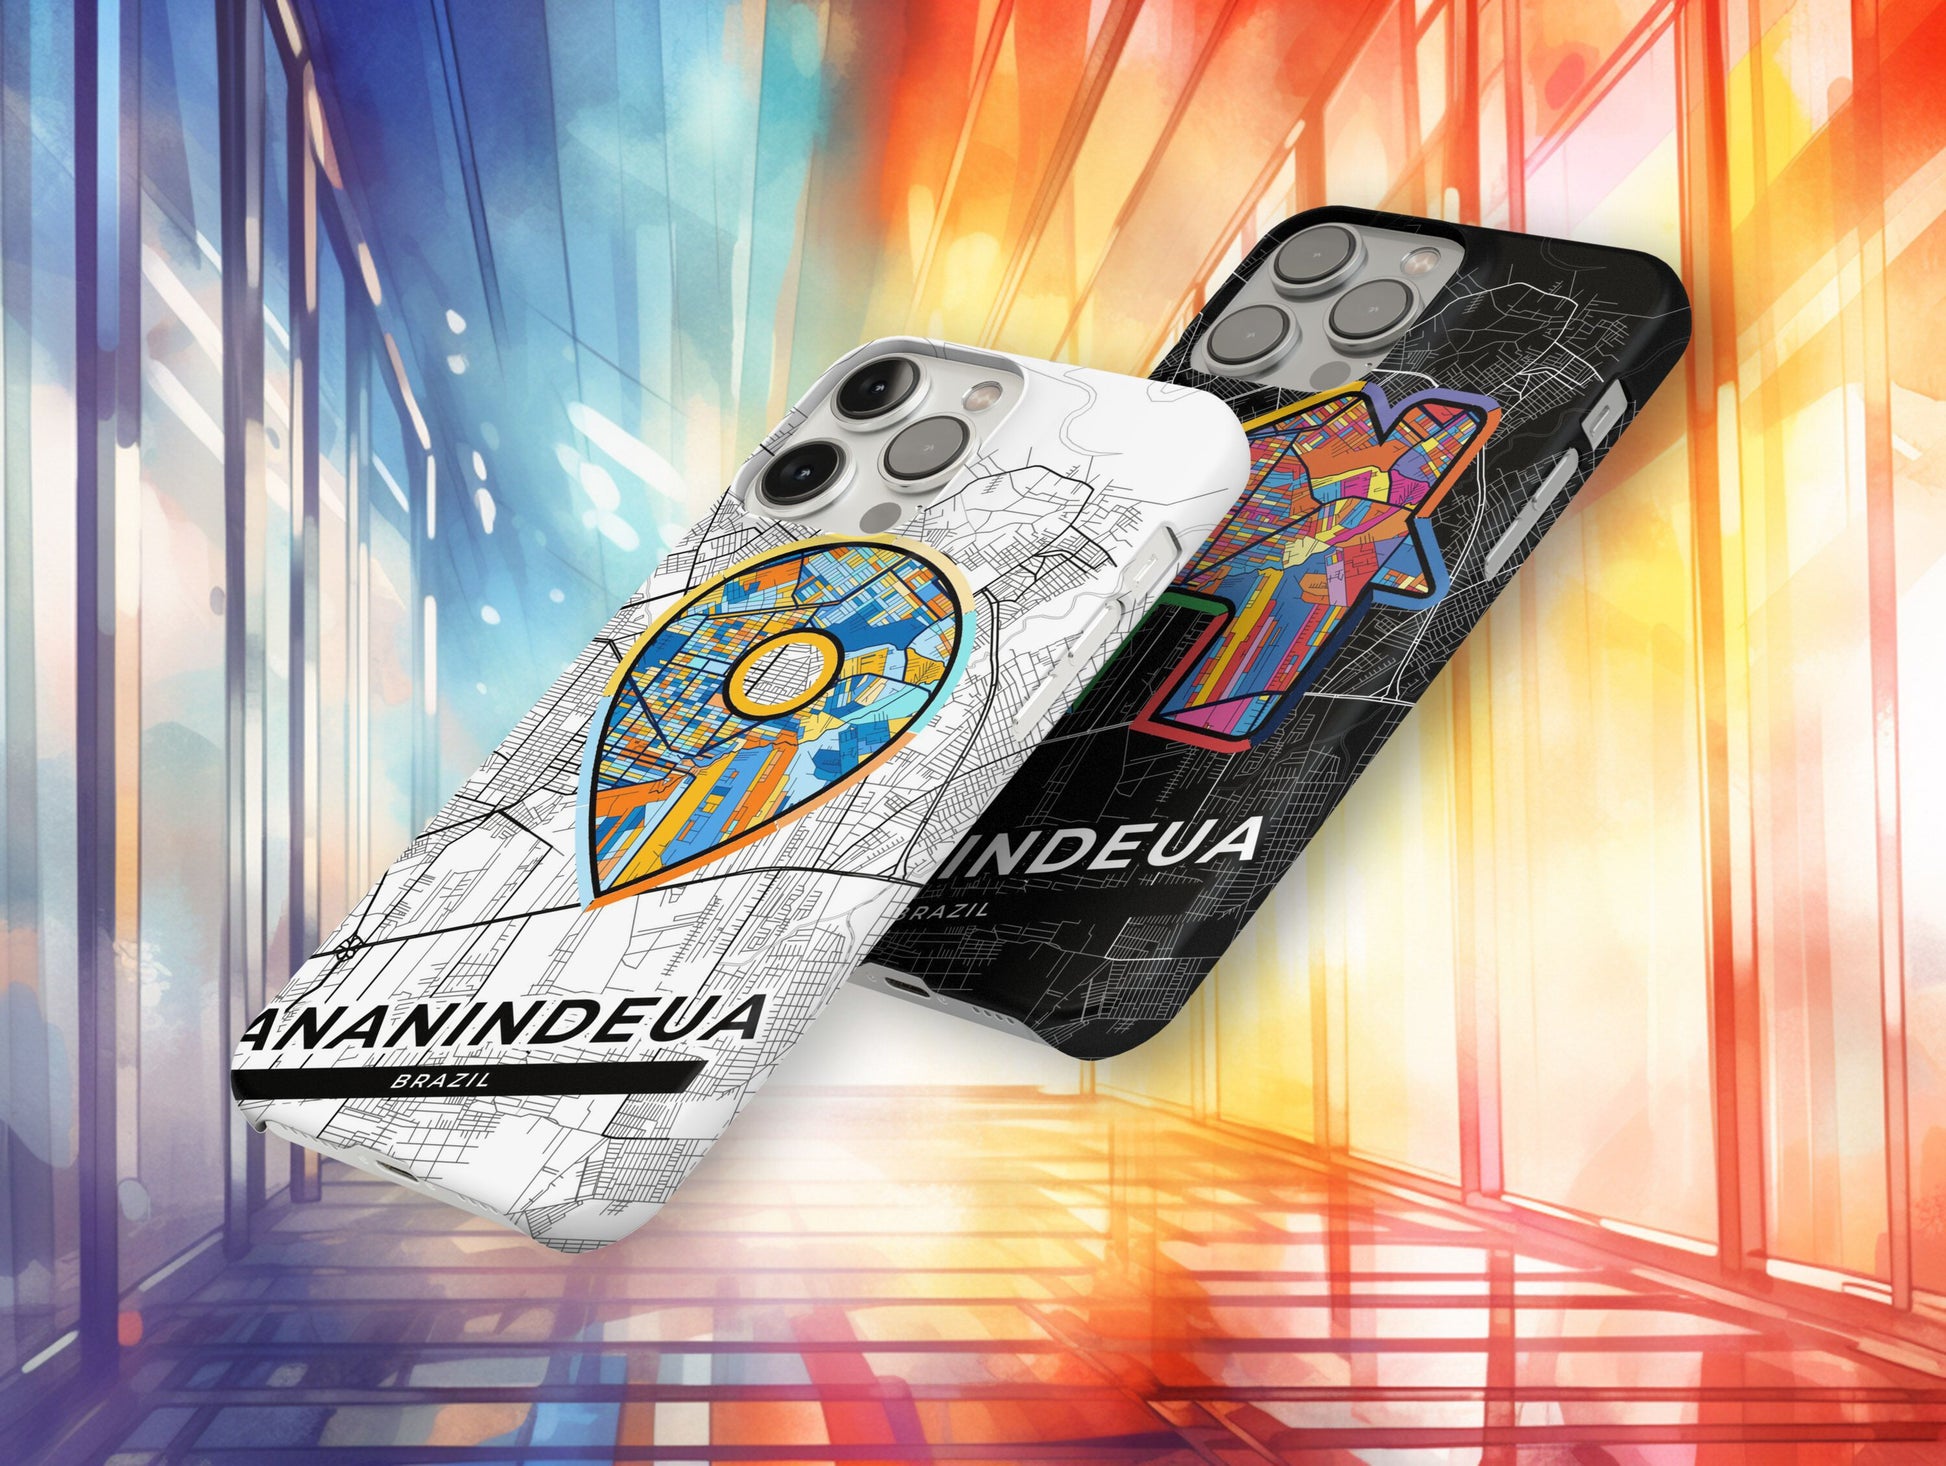 Ananindeua Brazil slim phone case with colorful icon. Birthday, wedding or housewarming gift. Couple match cases.